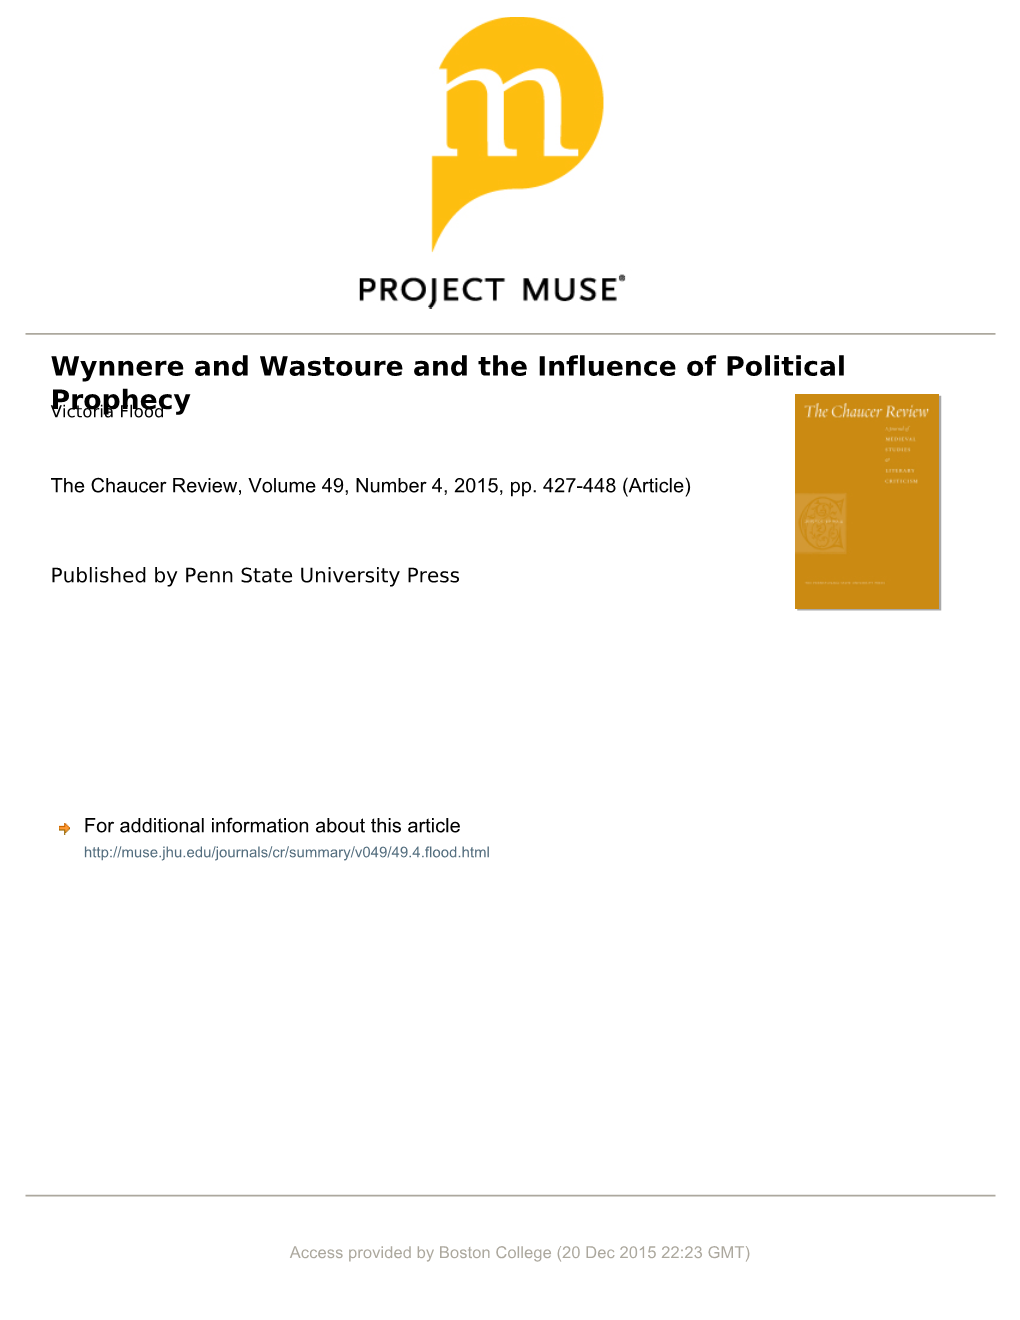 Wynnere and Wastoure and the Influence of Political Prophecy Victoria Flood